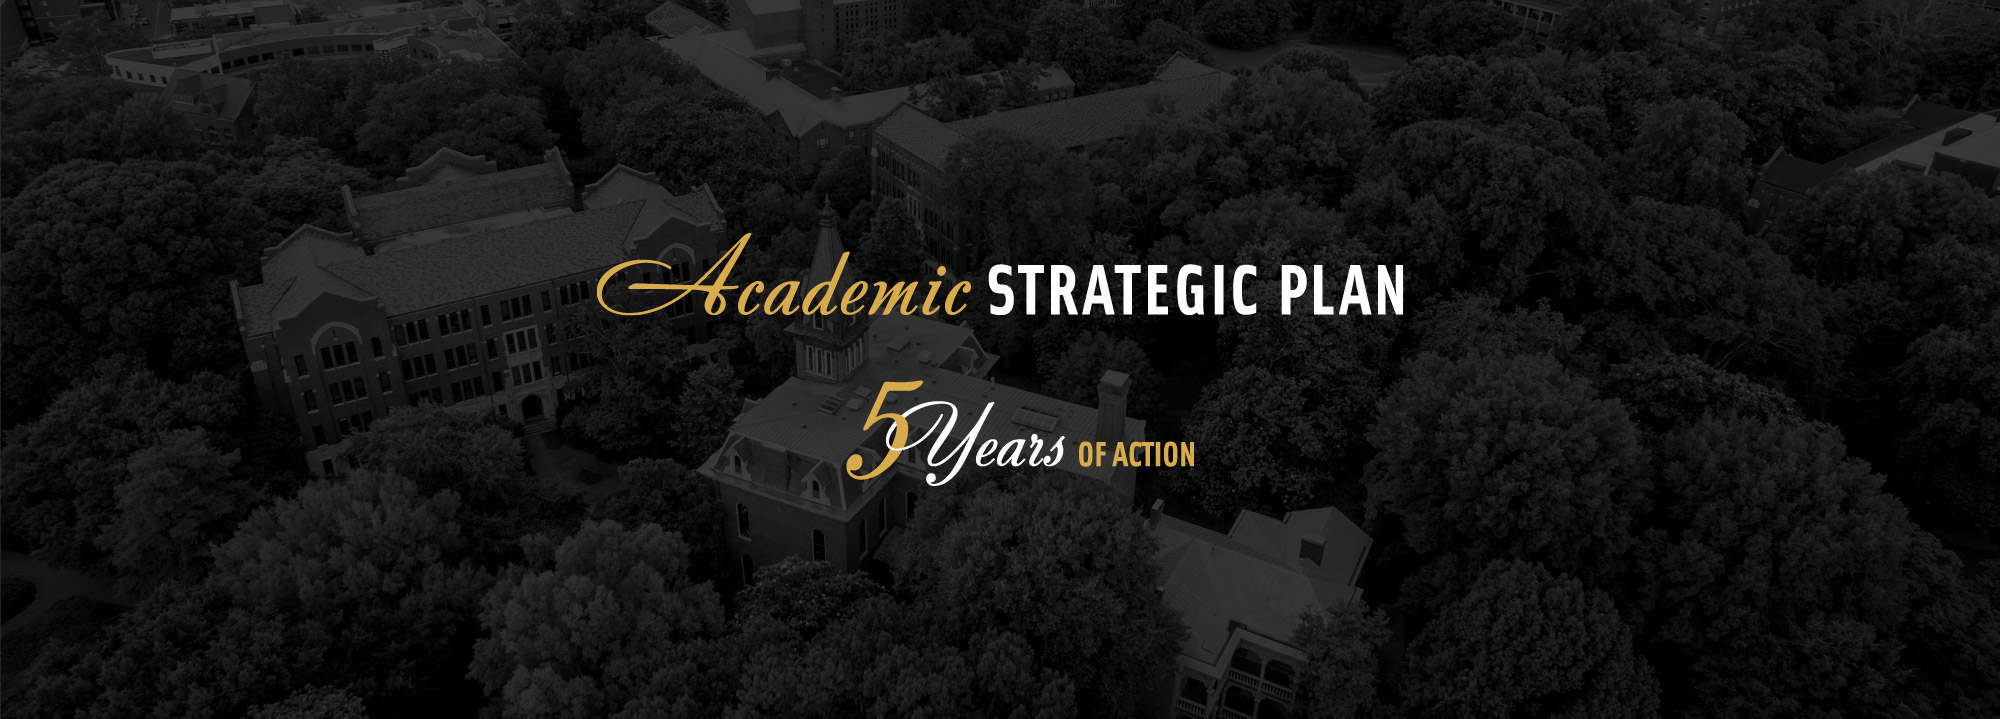 Academic Strategic Plan: Five Years of Action